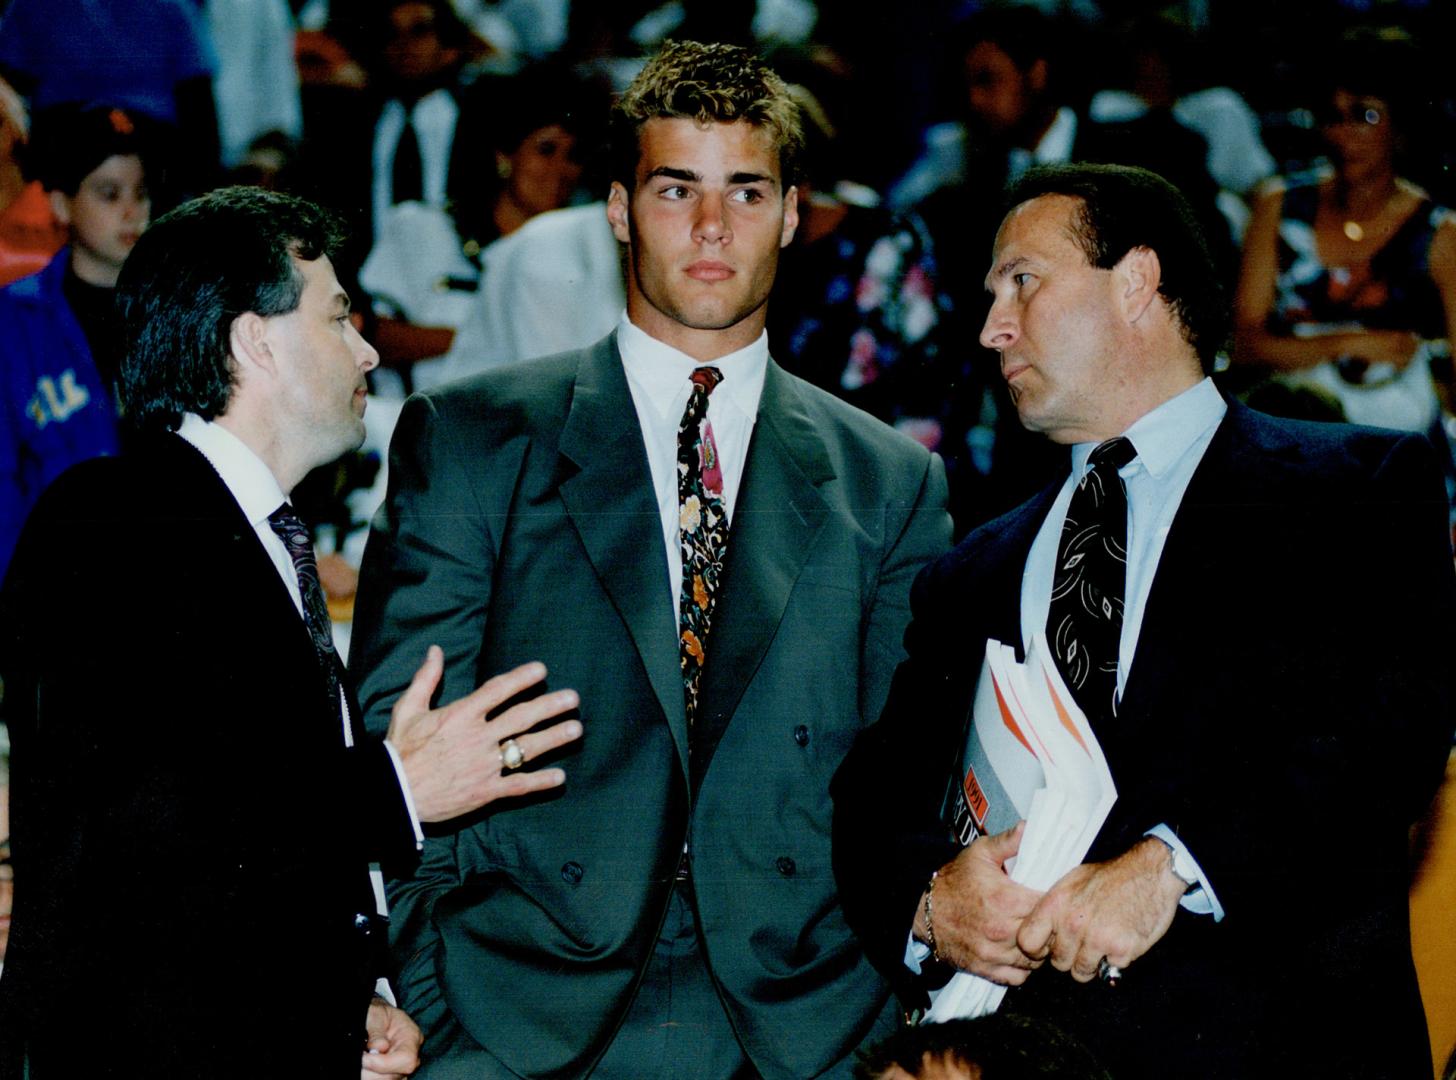 Seeing stars: Eric Lindros was rocked in a collision with Brent Sutter.